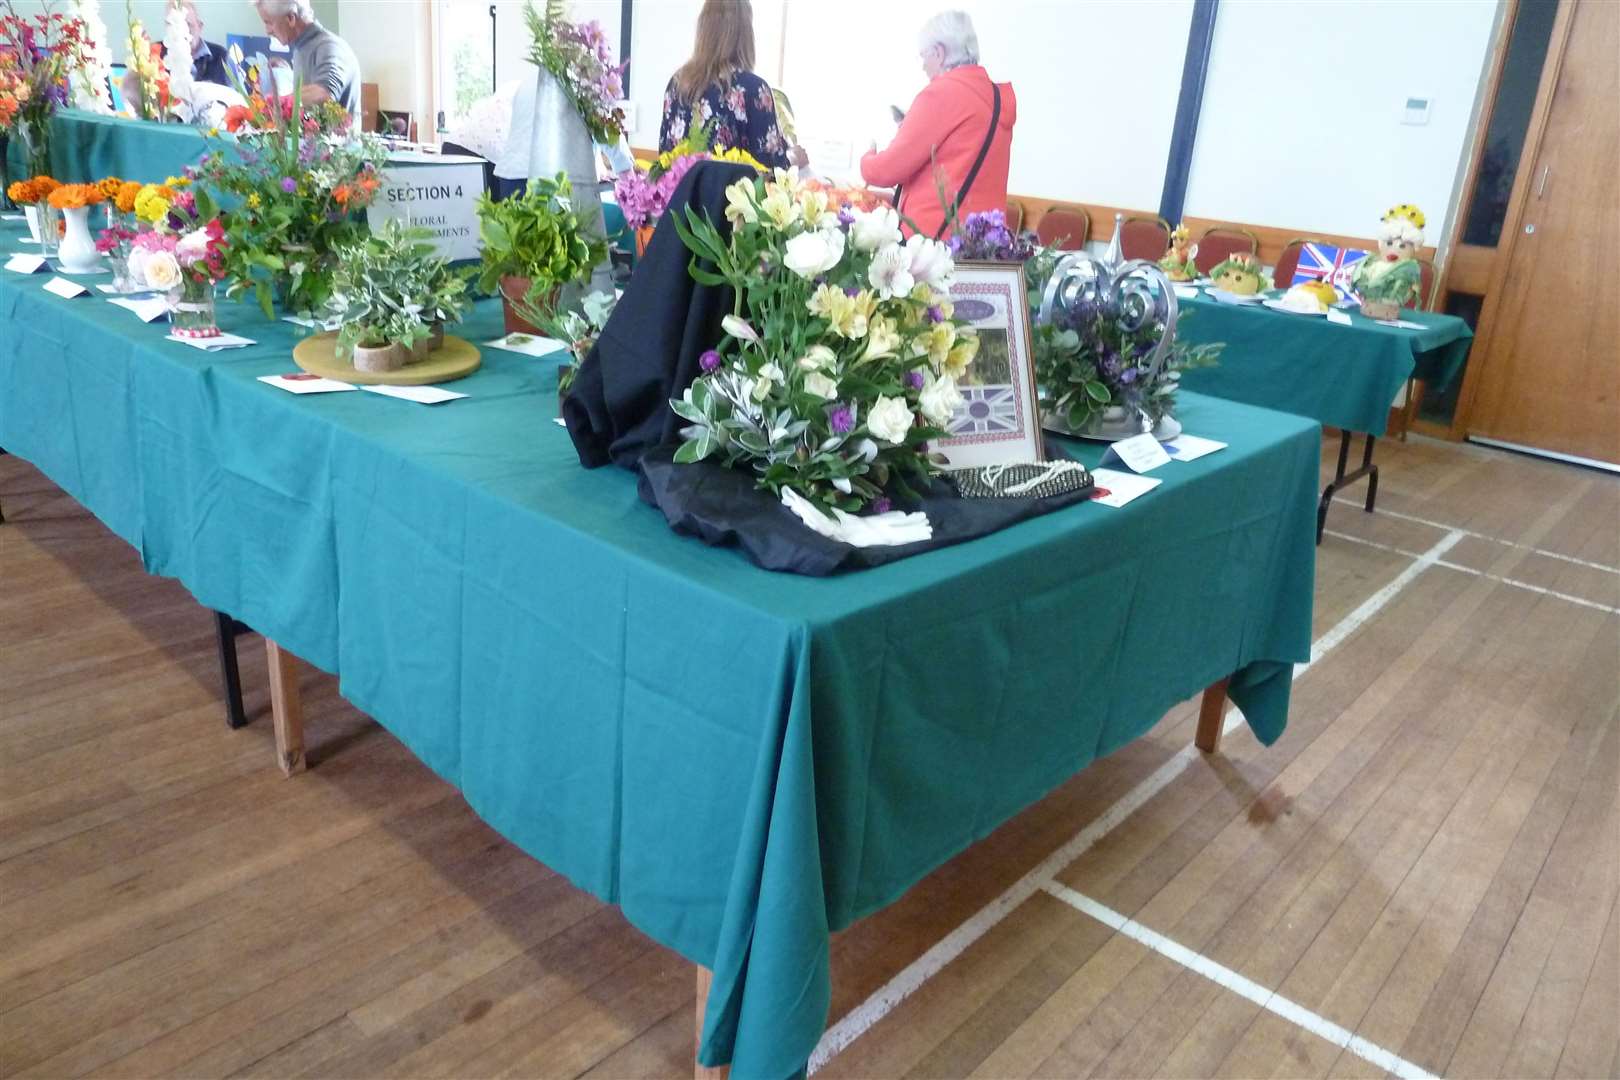 Colourful displays at Reay Garden Club's 2022 show.